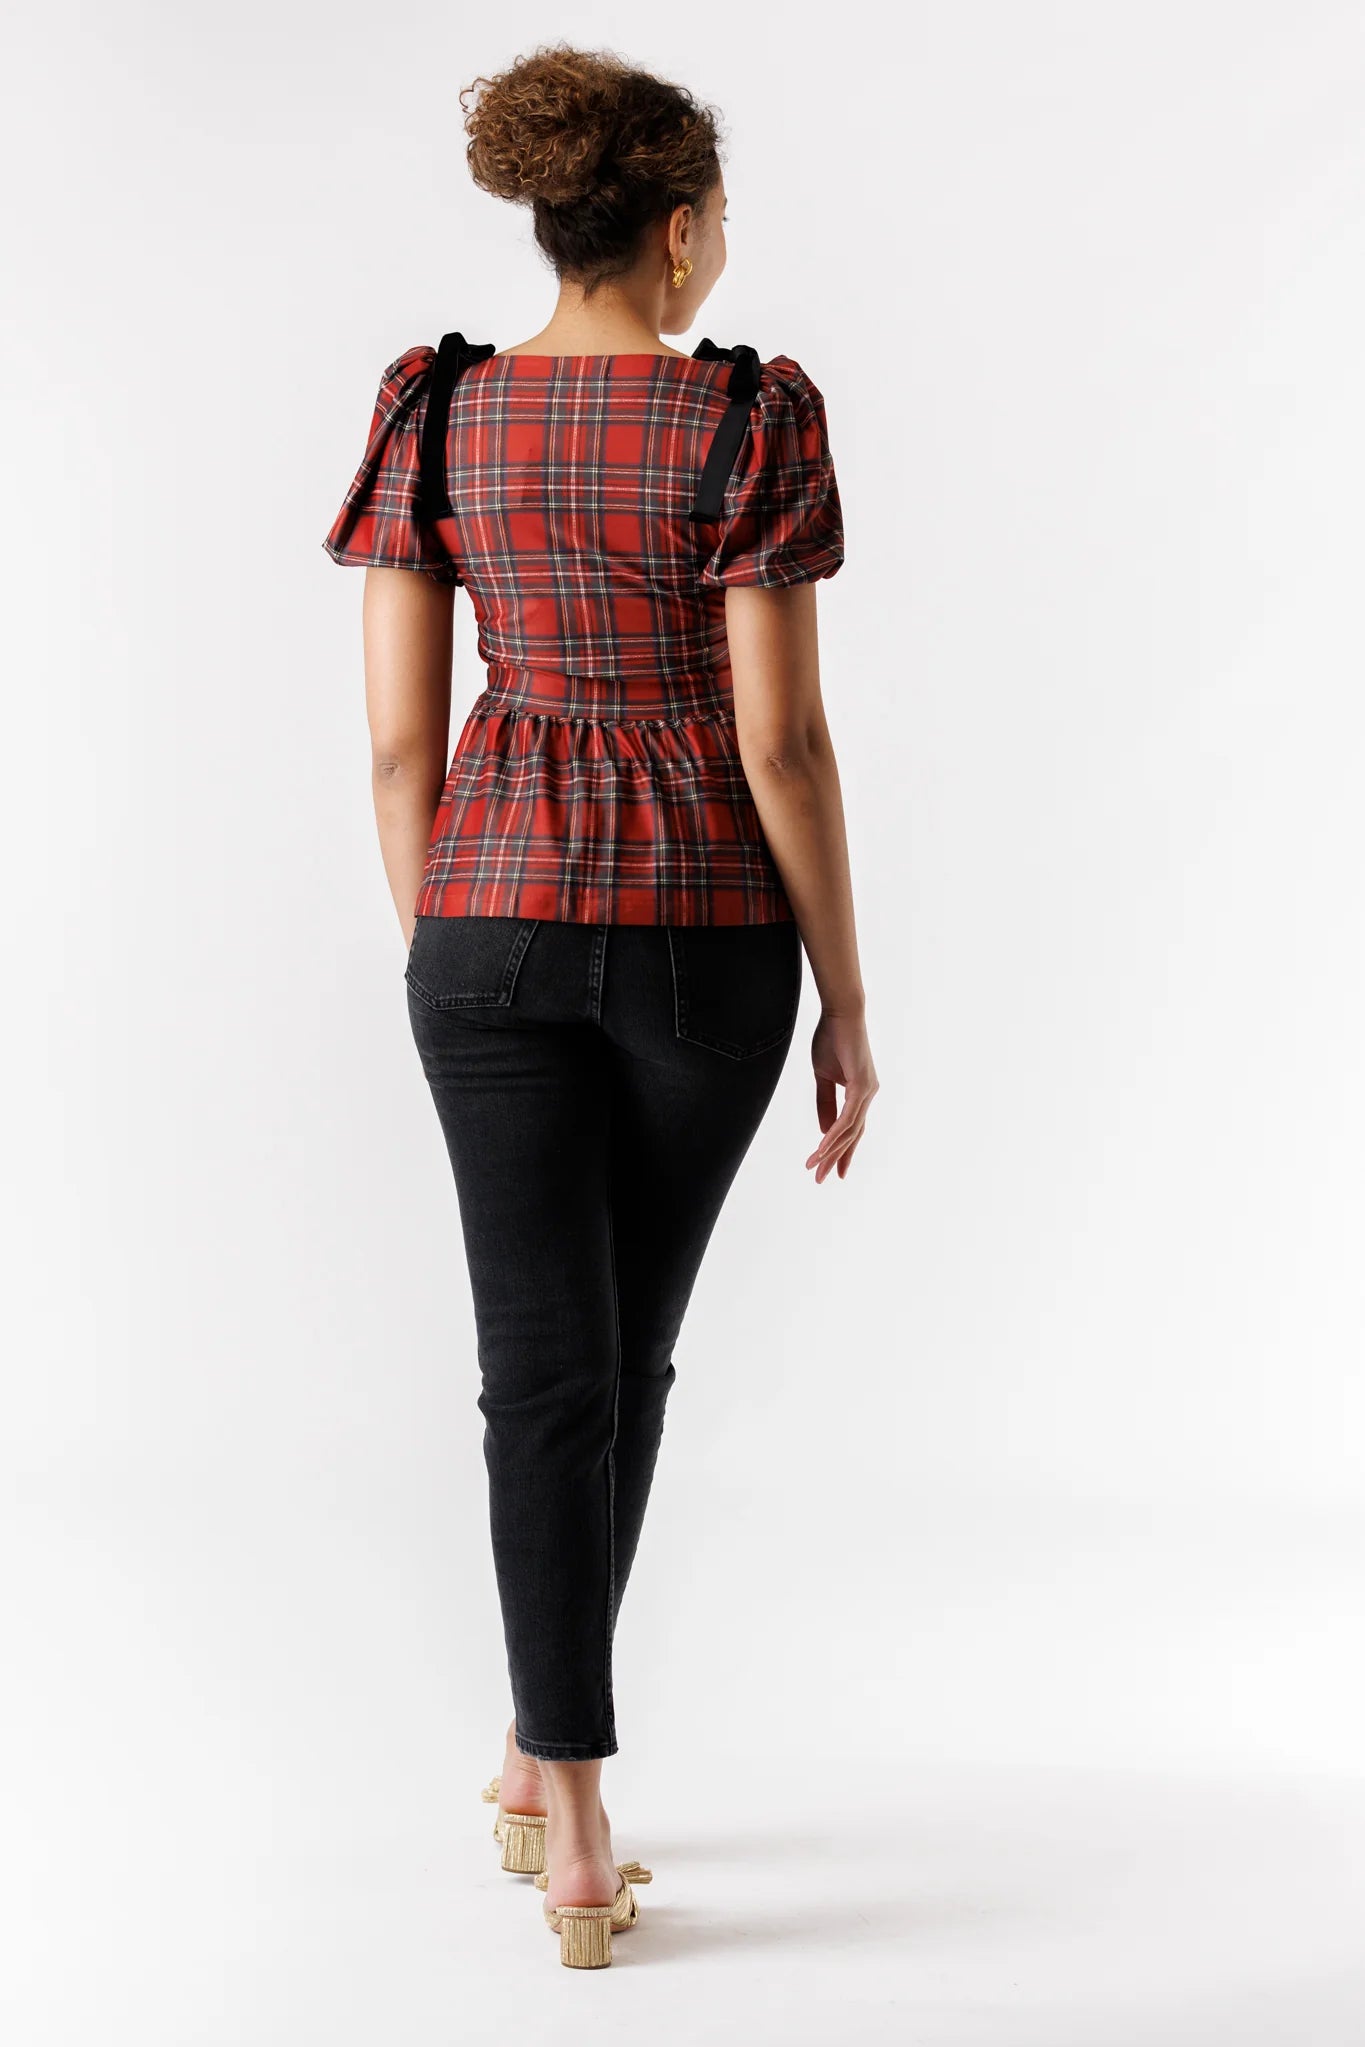 The Oliver Top - Merry Tartan